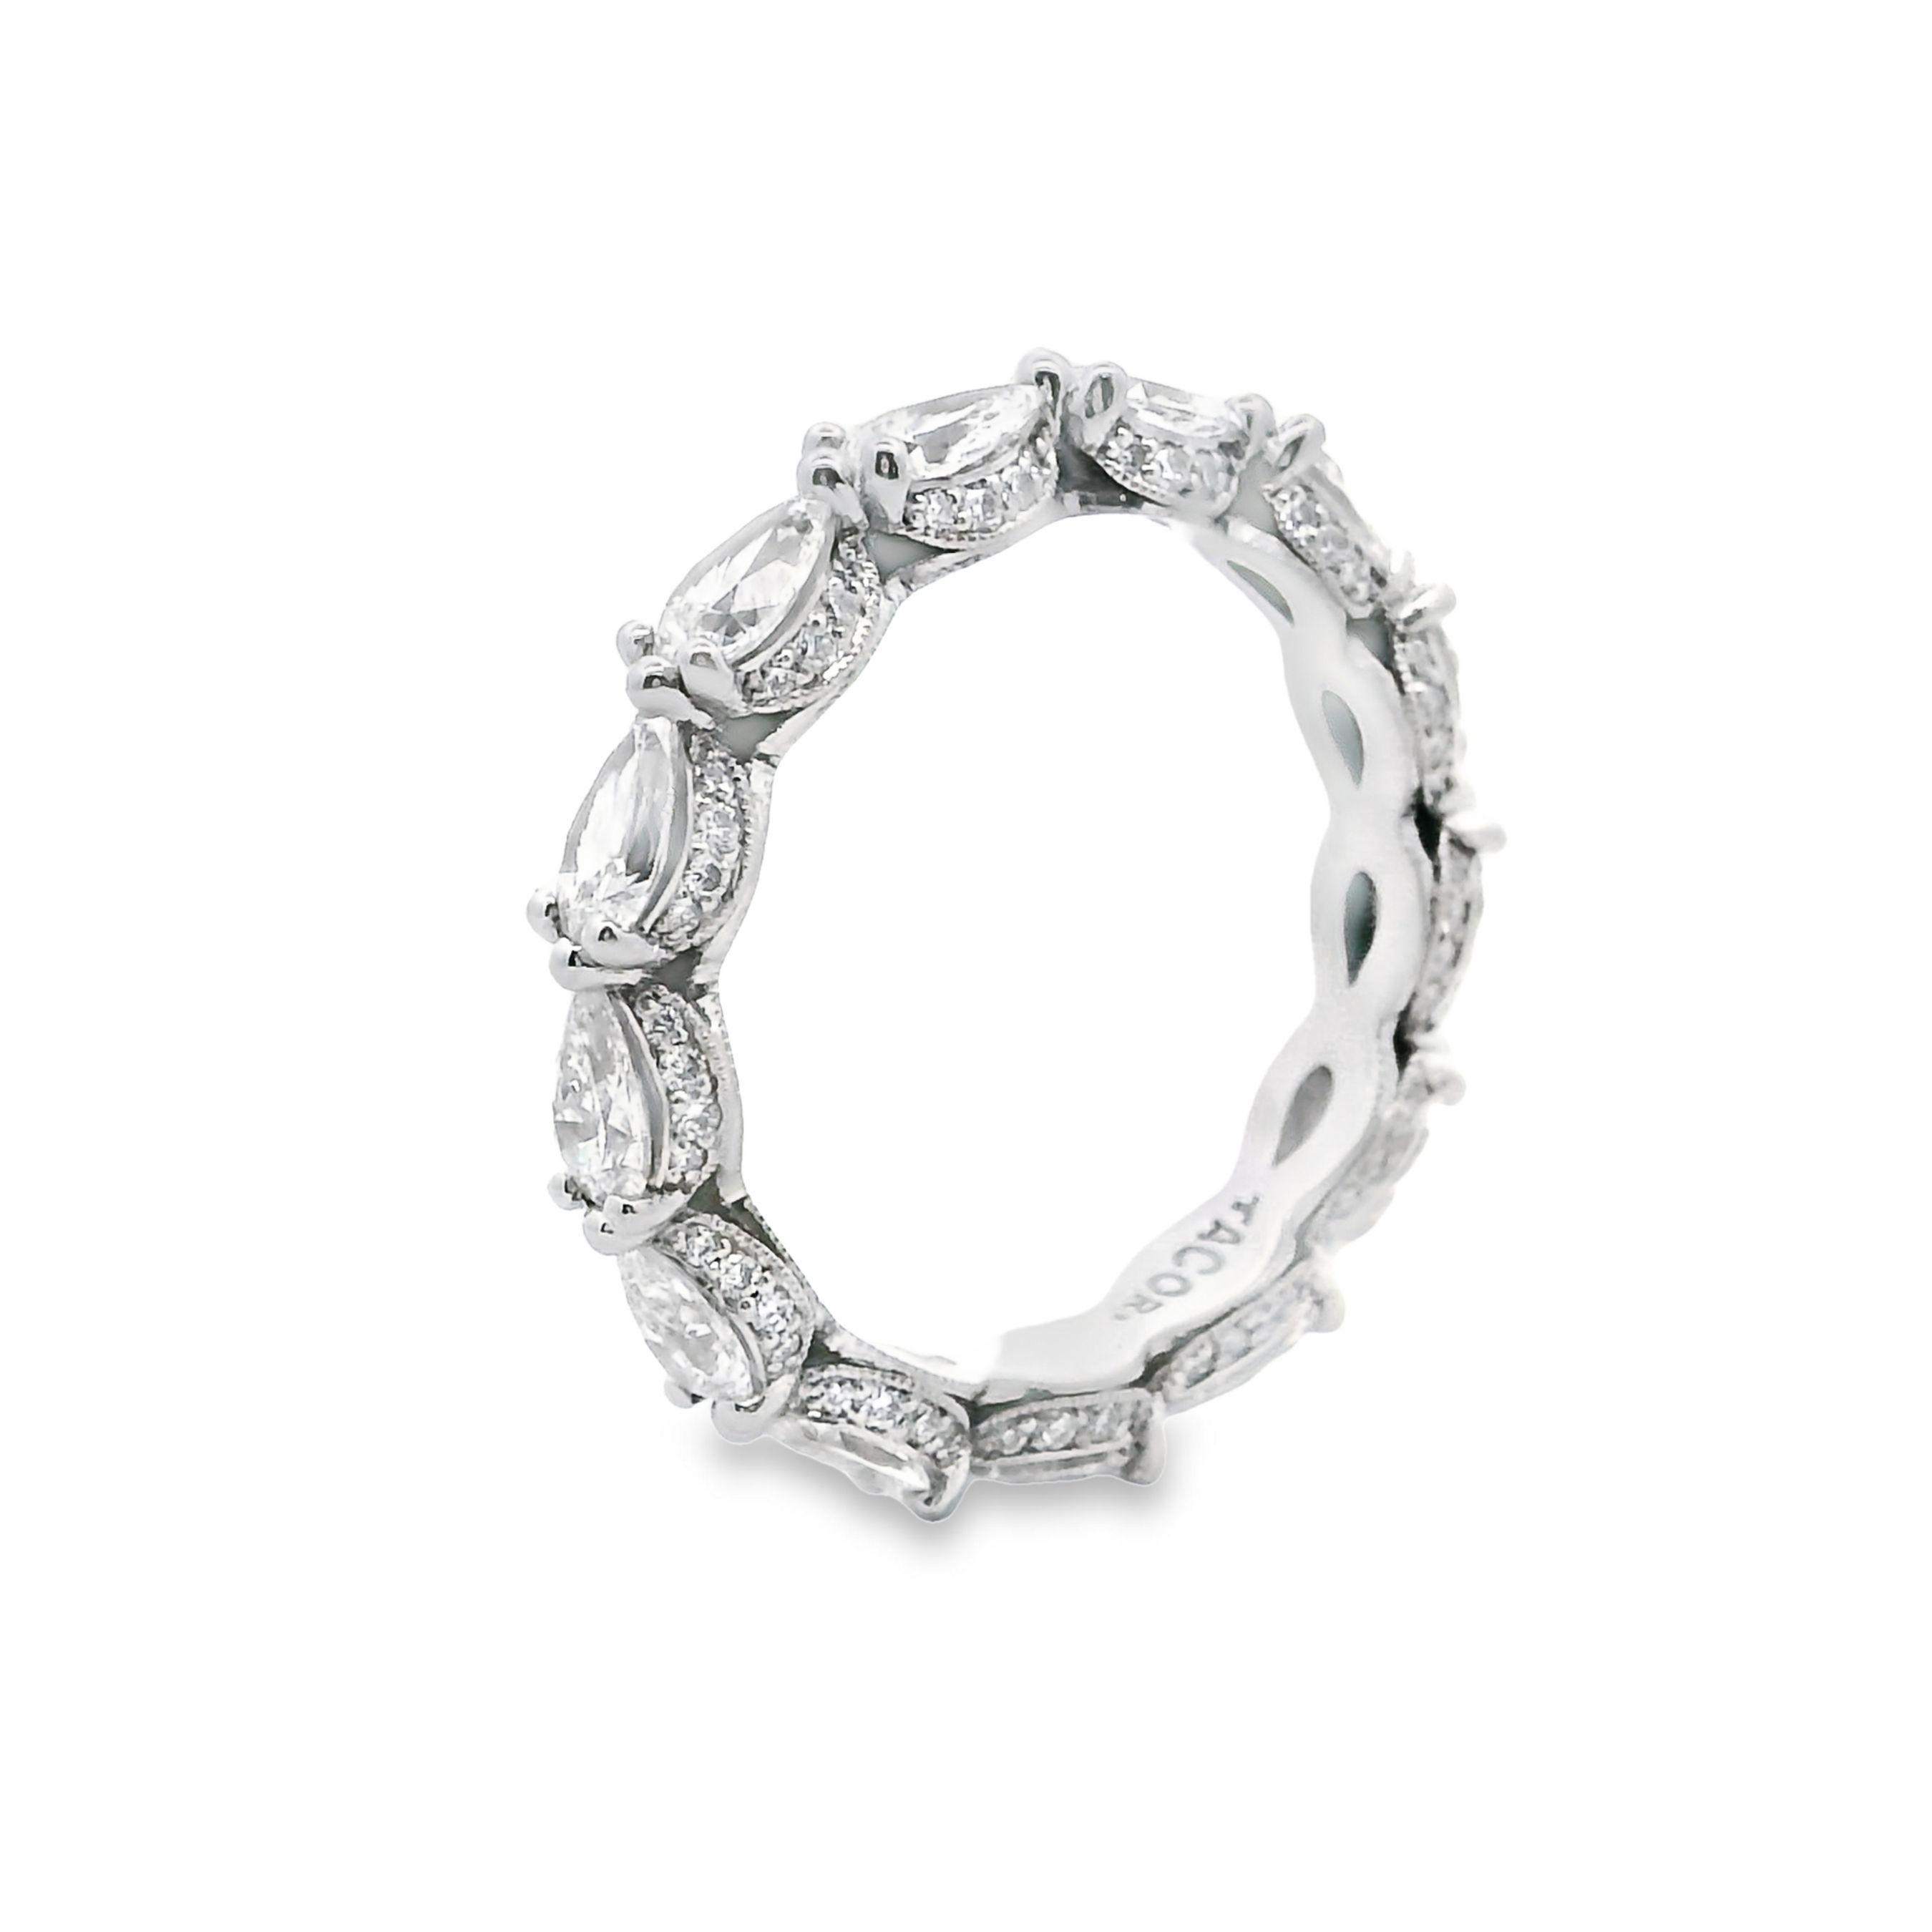 Contemporary Tacori HT2642 Platinum Pear Shaped Diamond Eternity Band 2.22 Carats, Size 6.5 For Sale